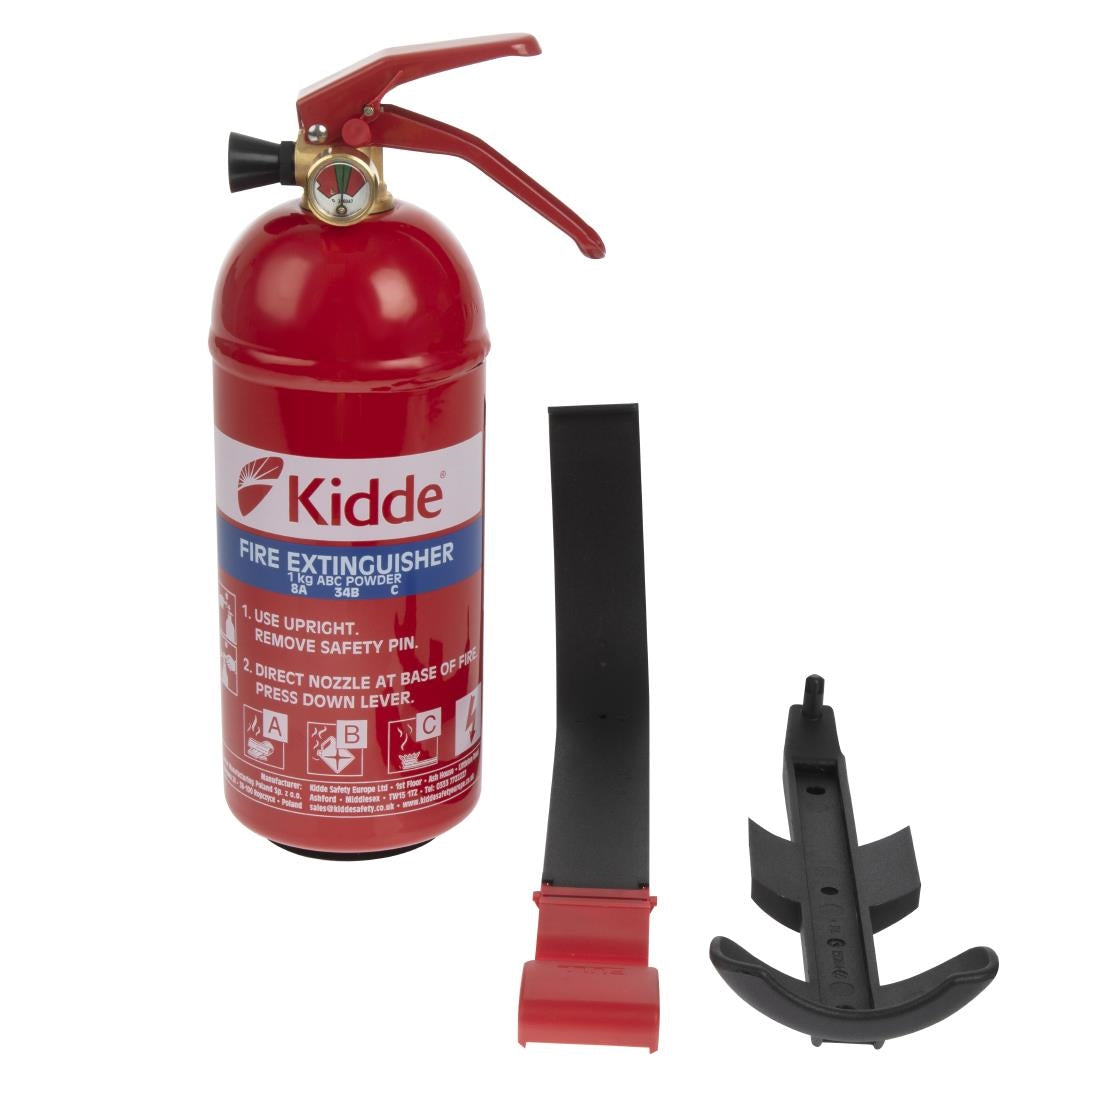 Kidde Multi Purpose Fire Extinguisher (A,B, C and electrical fires) JD Catering Equipment Solutions Ltd